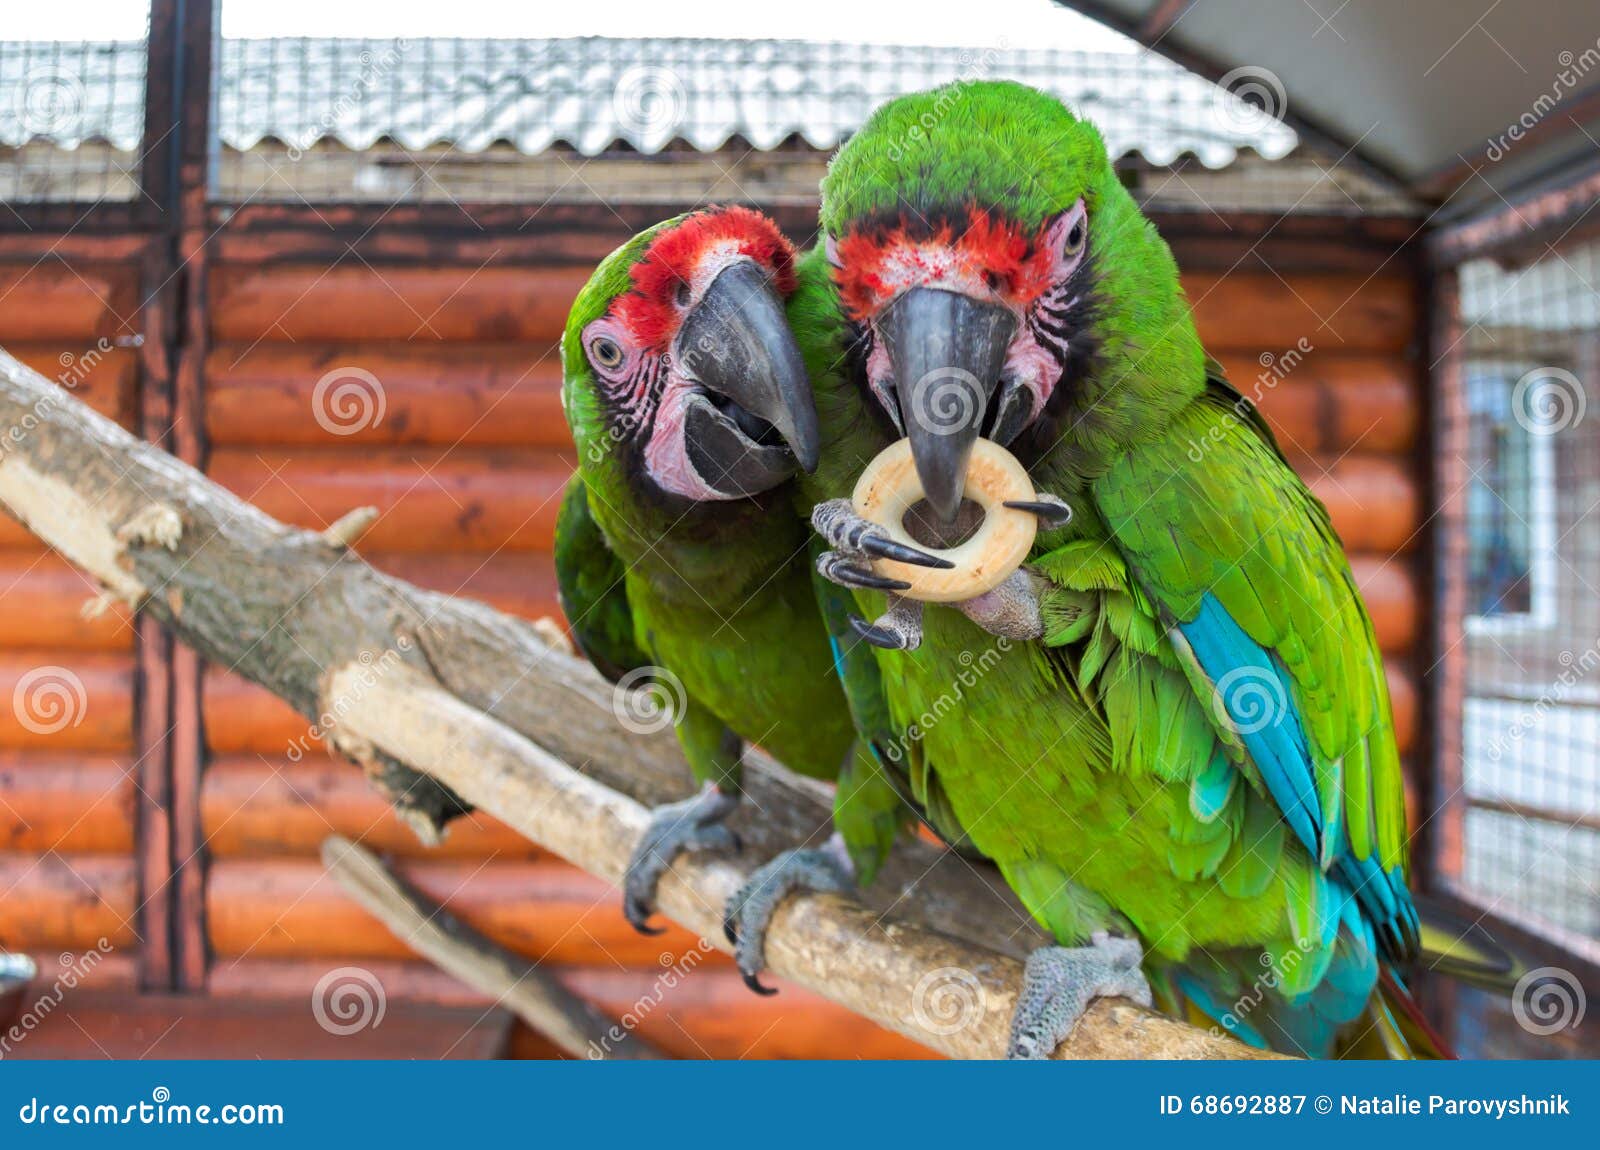 two parrots contend for a bagel